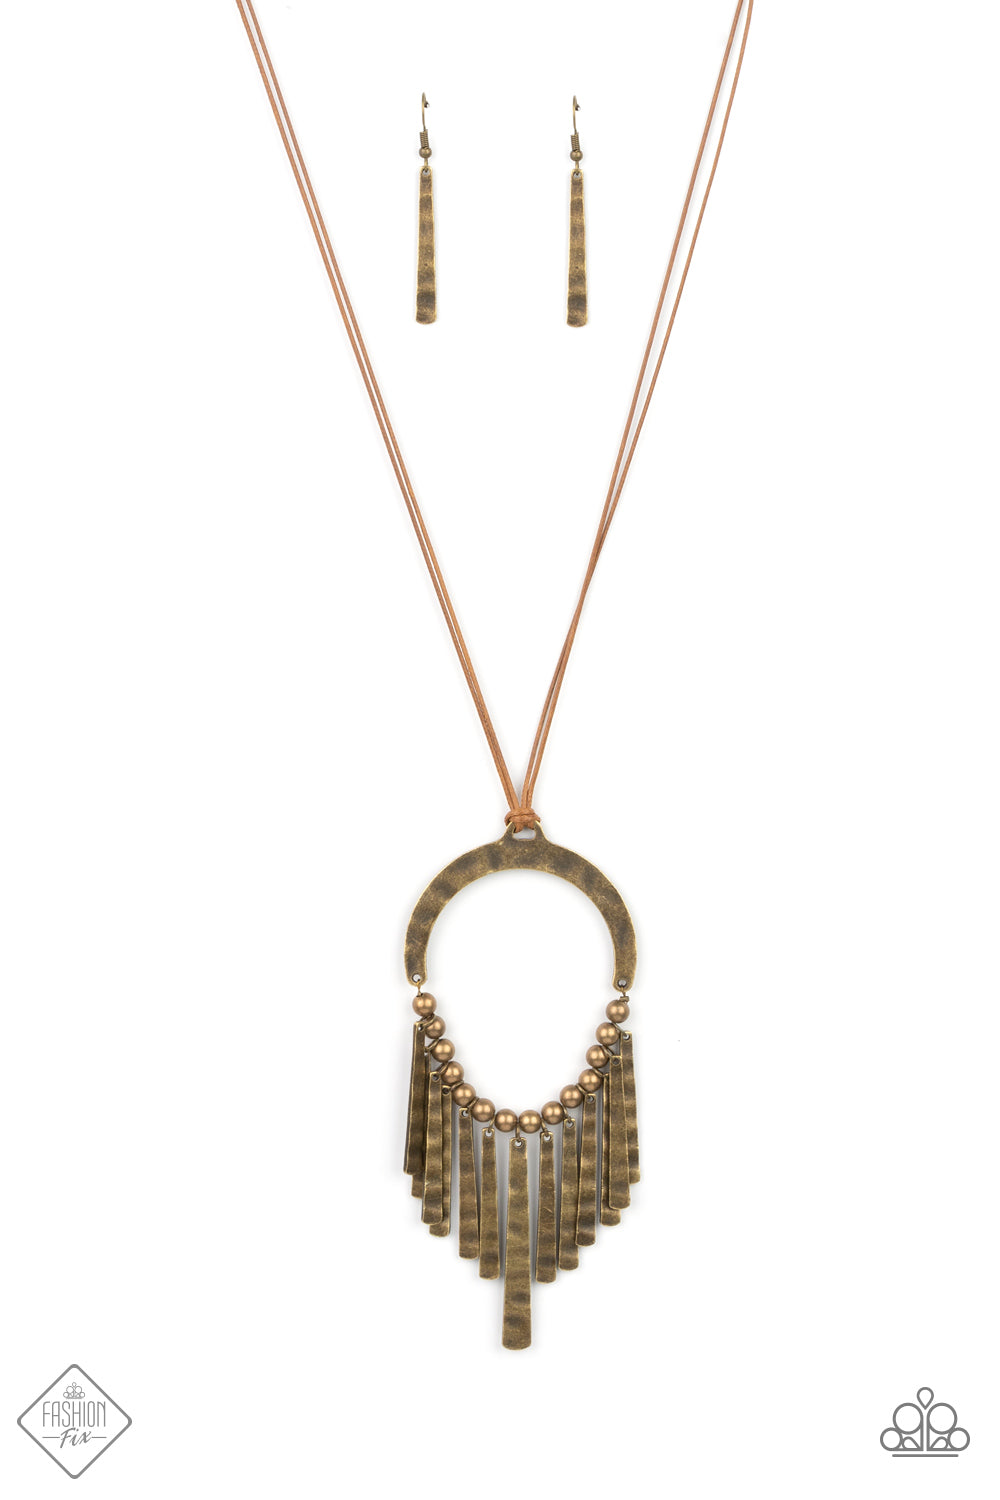 You Wouldnt FLARE! Necklace - Brass